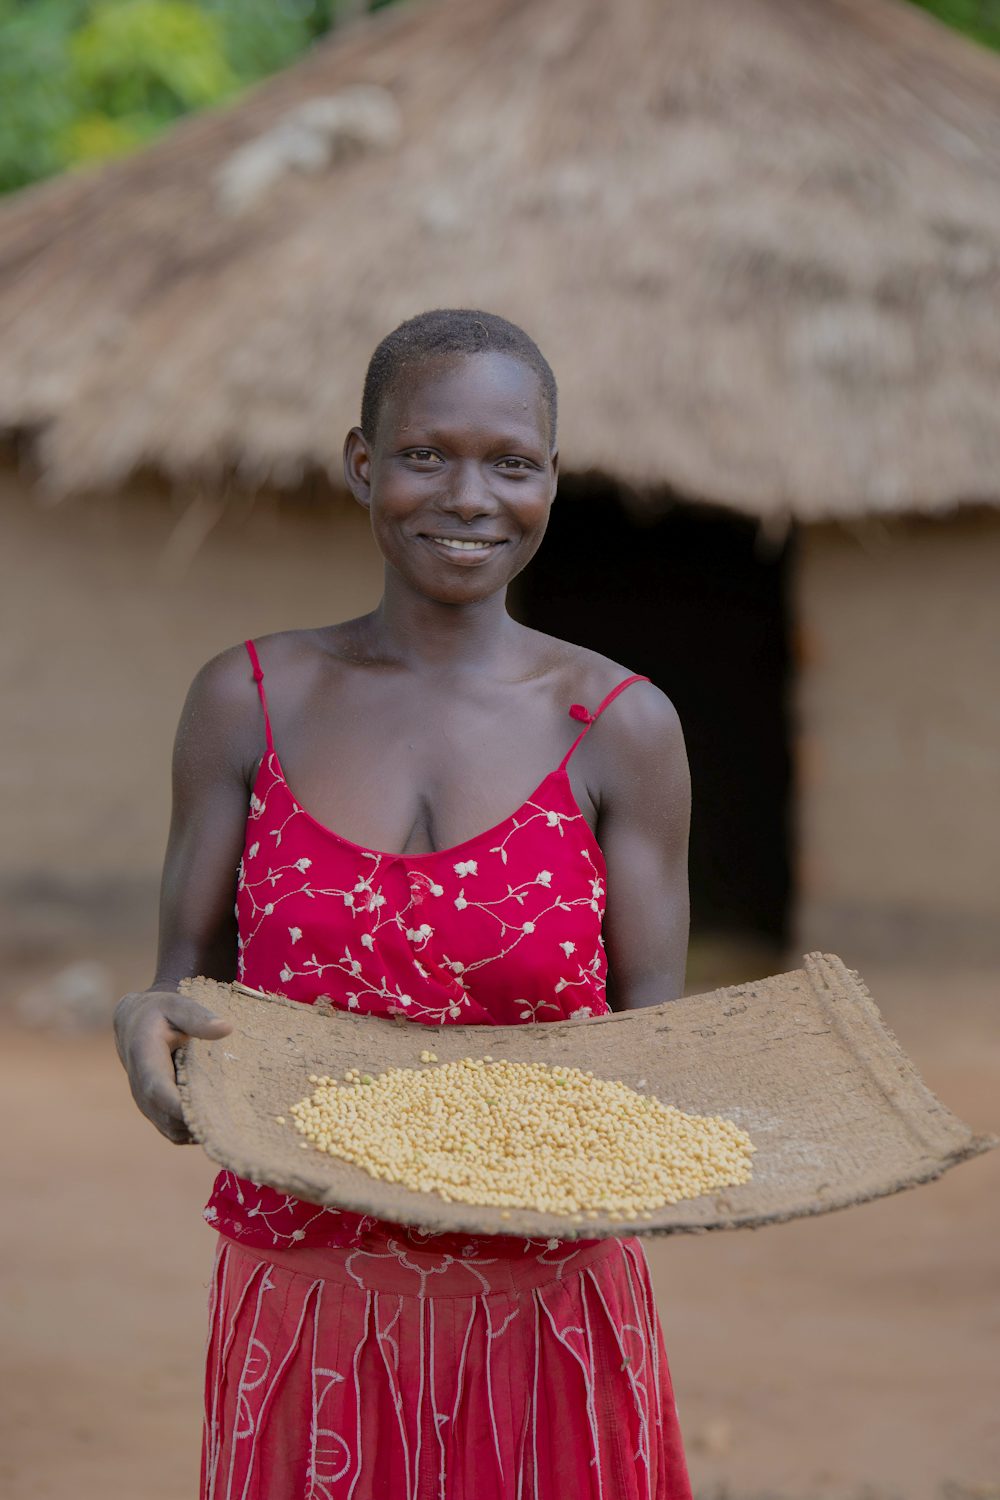 A woman poses with a tray of soybean seeds in Uganda.